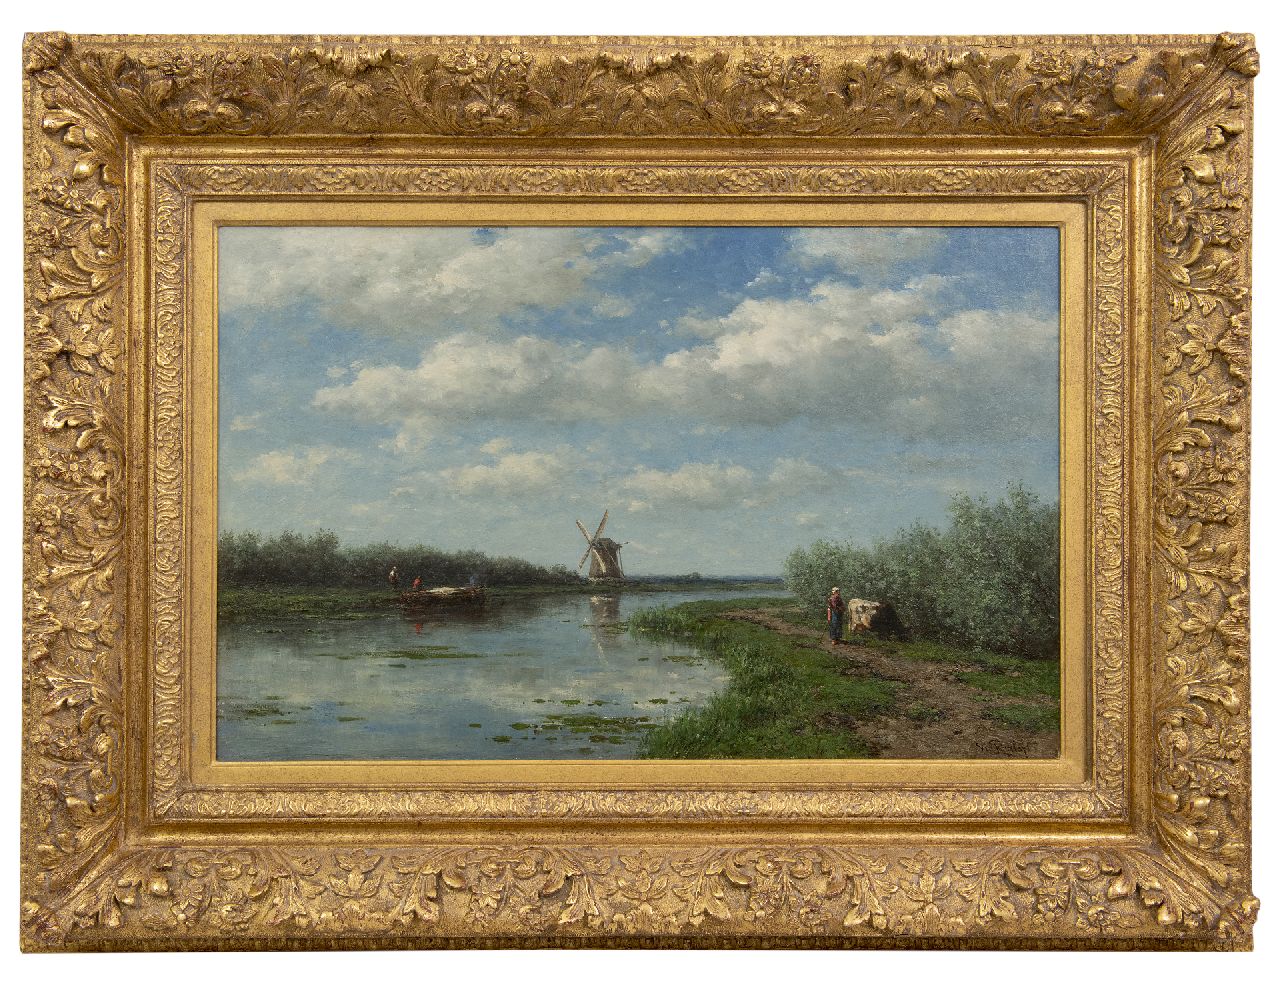 Roelofs W.  | Willem Roelofs | Paintings offered for sale | The 't Hoog- en Groenland mill, Baambrugge, oil on canvas 46.9 x 72.9 cm, signed l.r.